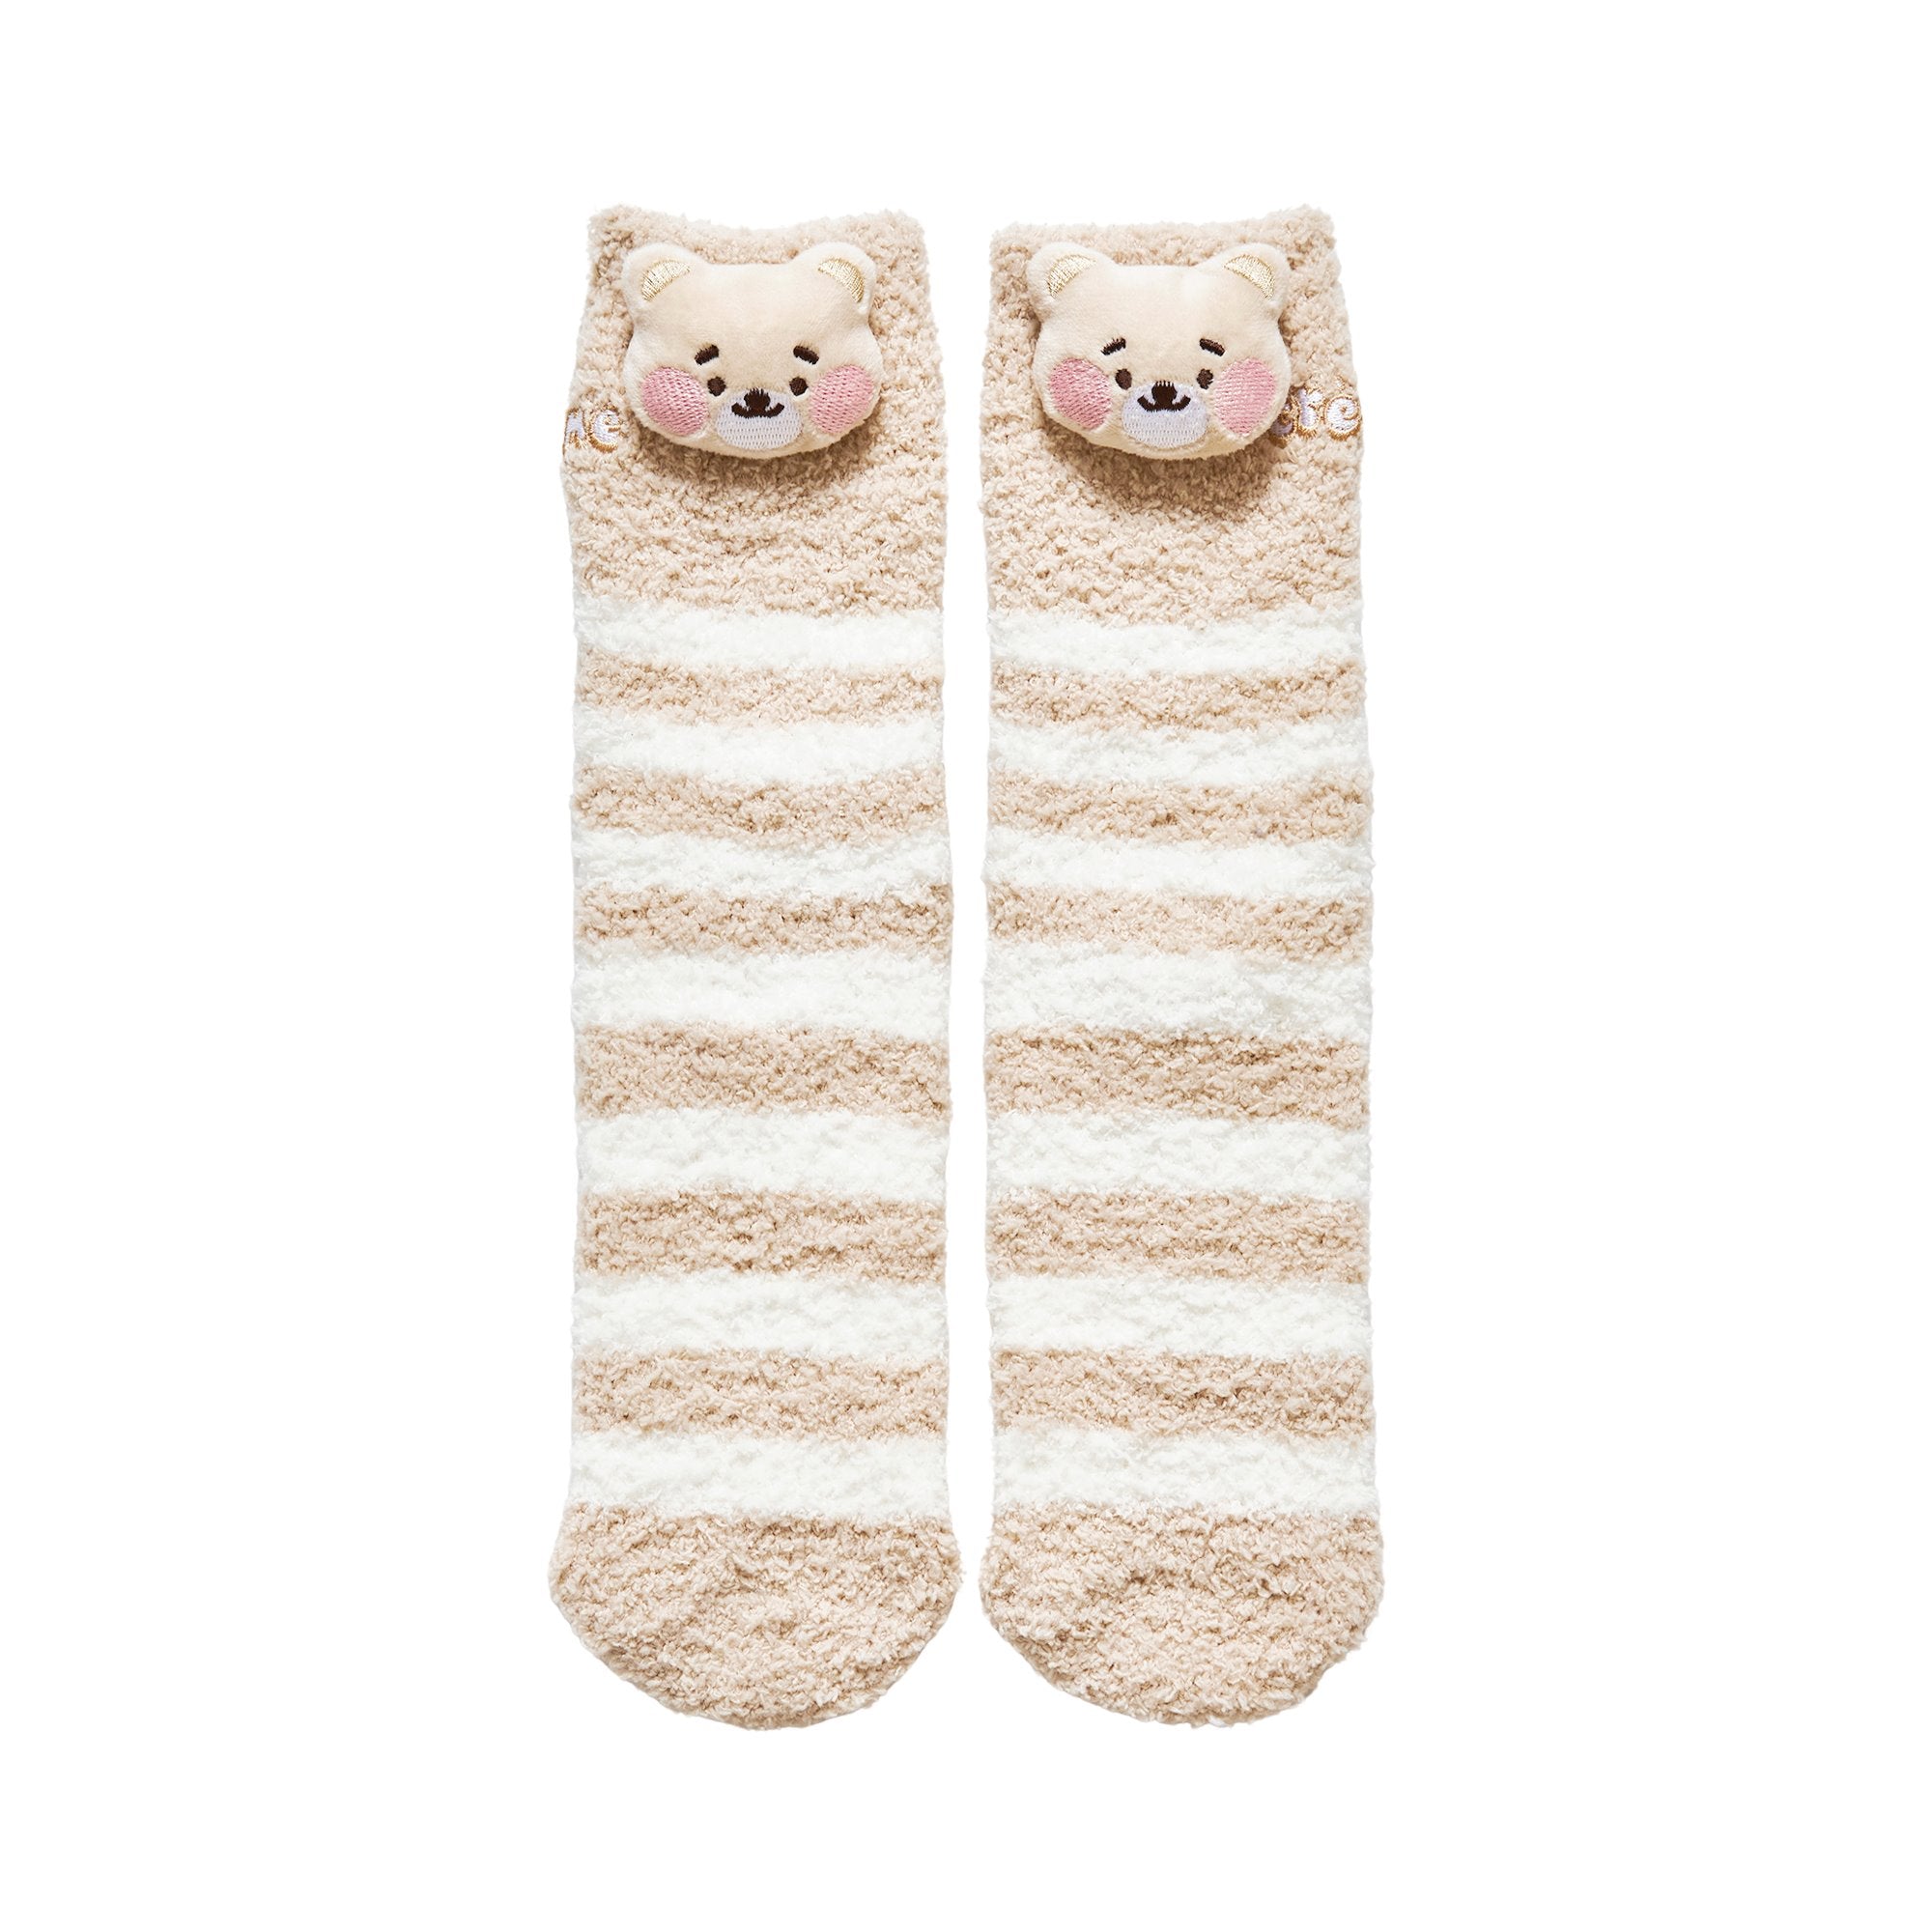 Beary Merry Infused Cozy Socks Socks The Crème Shop 